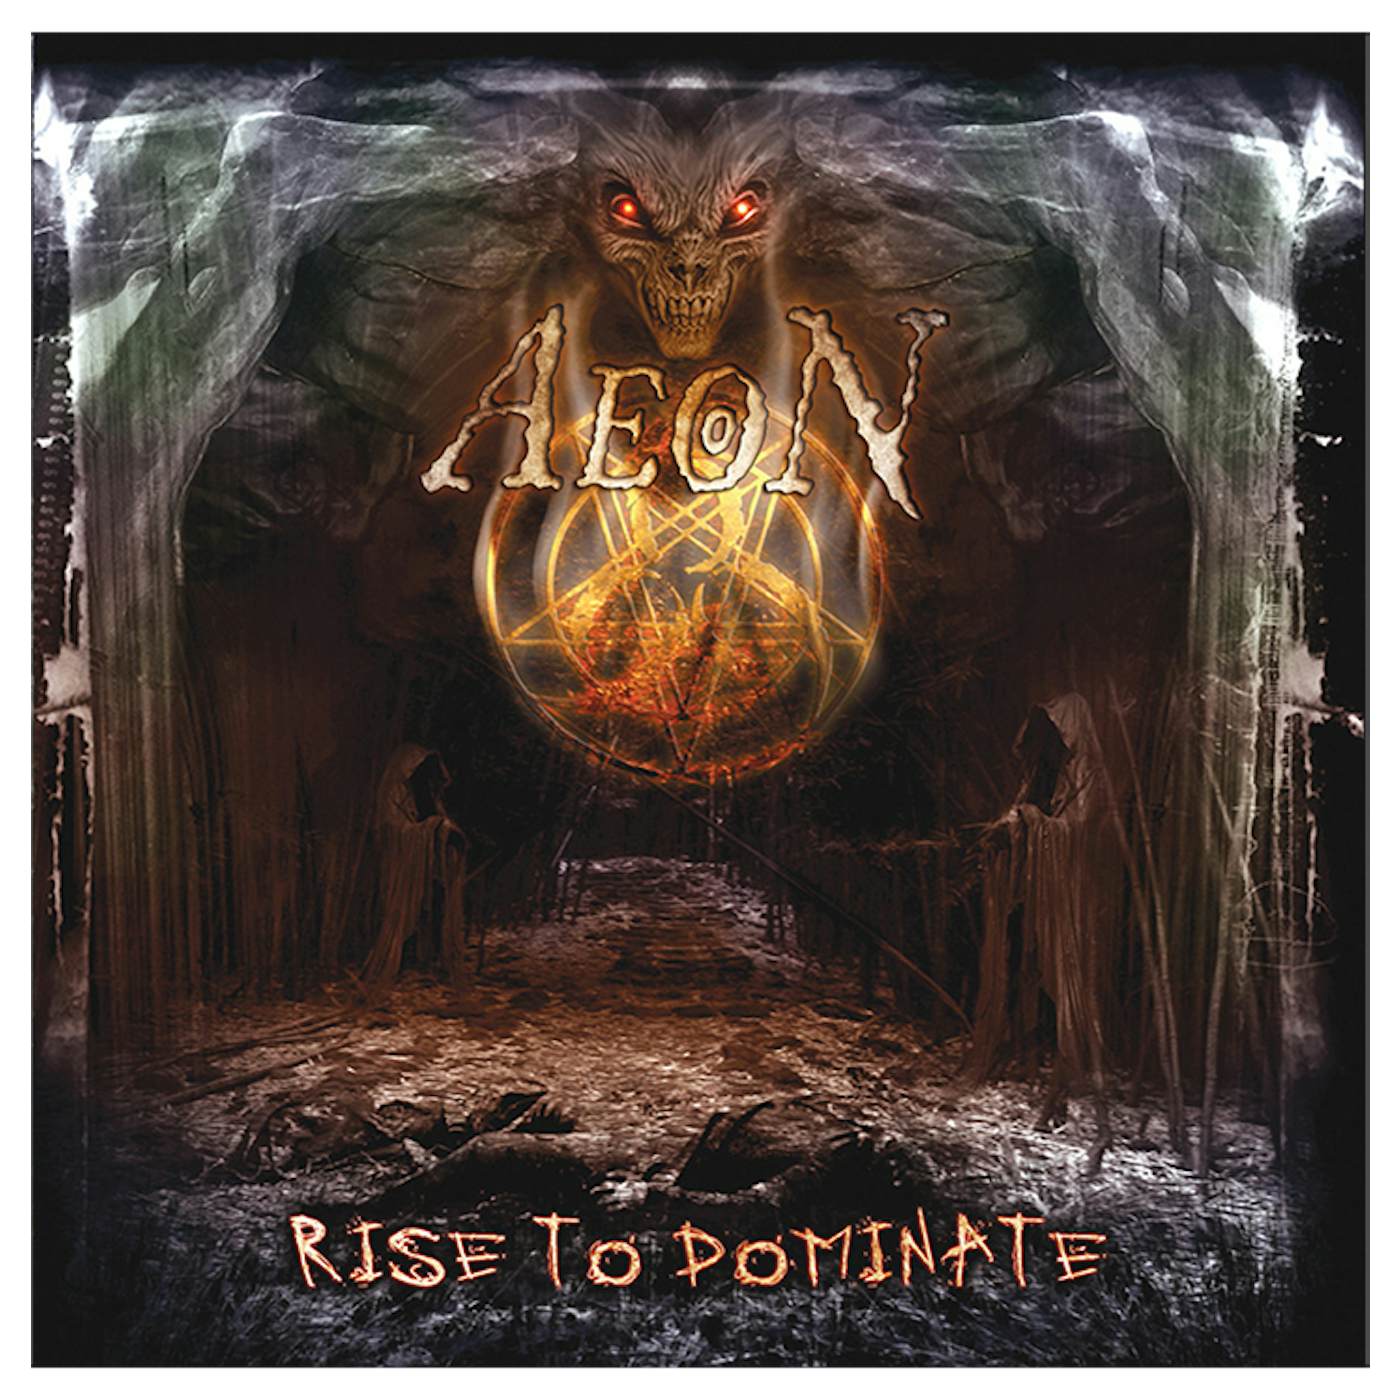 AEON - 'Rise to Dominate' CD